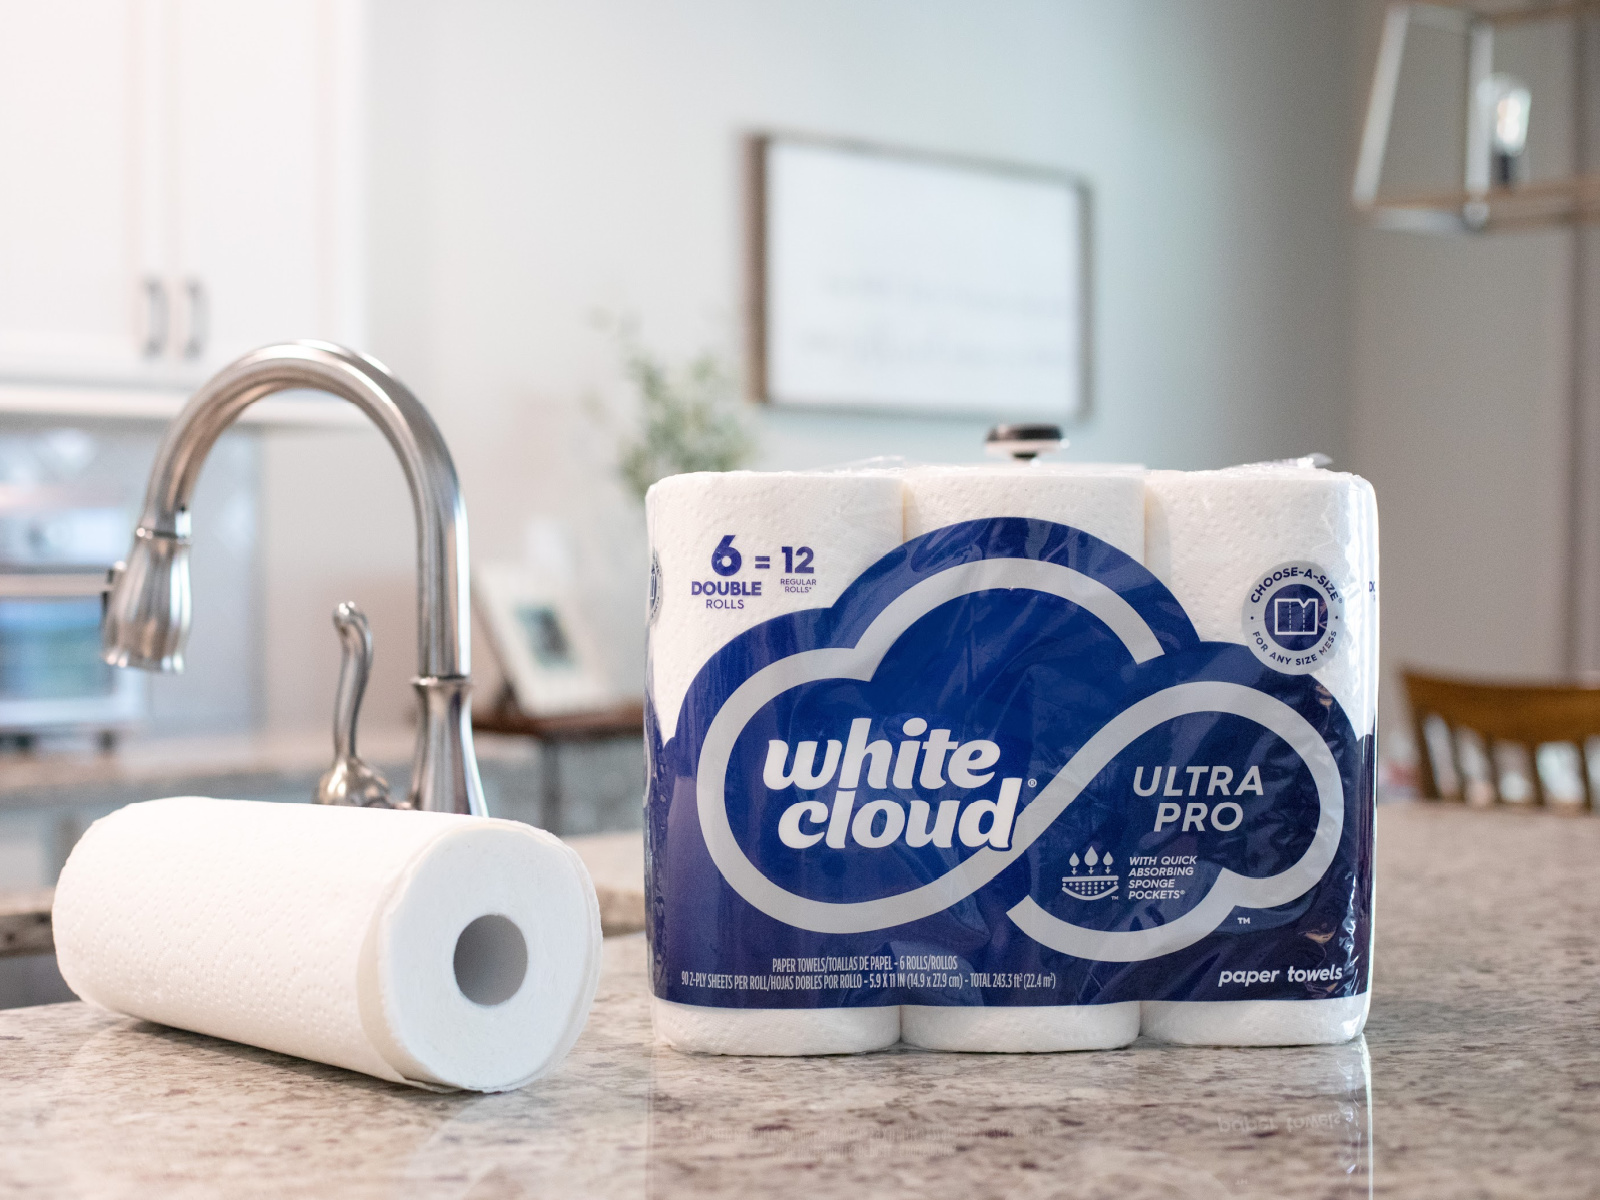 White Cloud® Toilet Paper & Paper Towel Products Are Now At Publix! Try Them And Save Big!